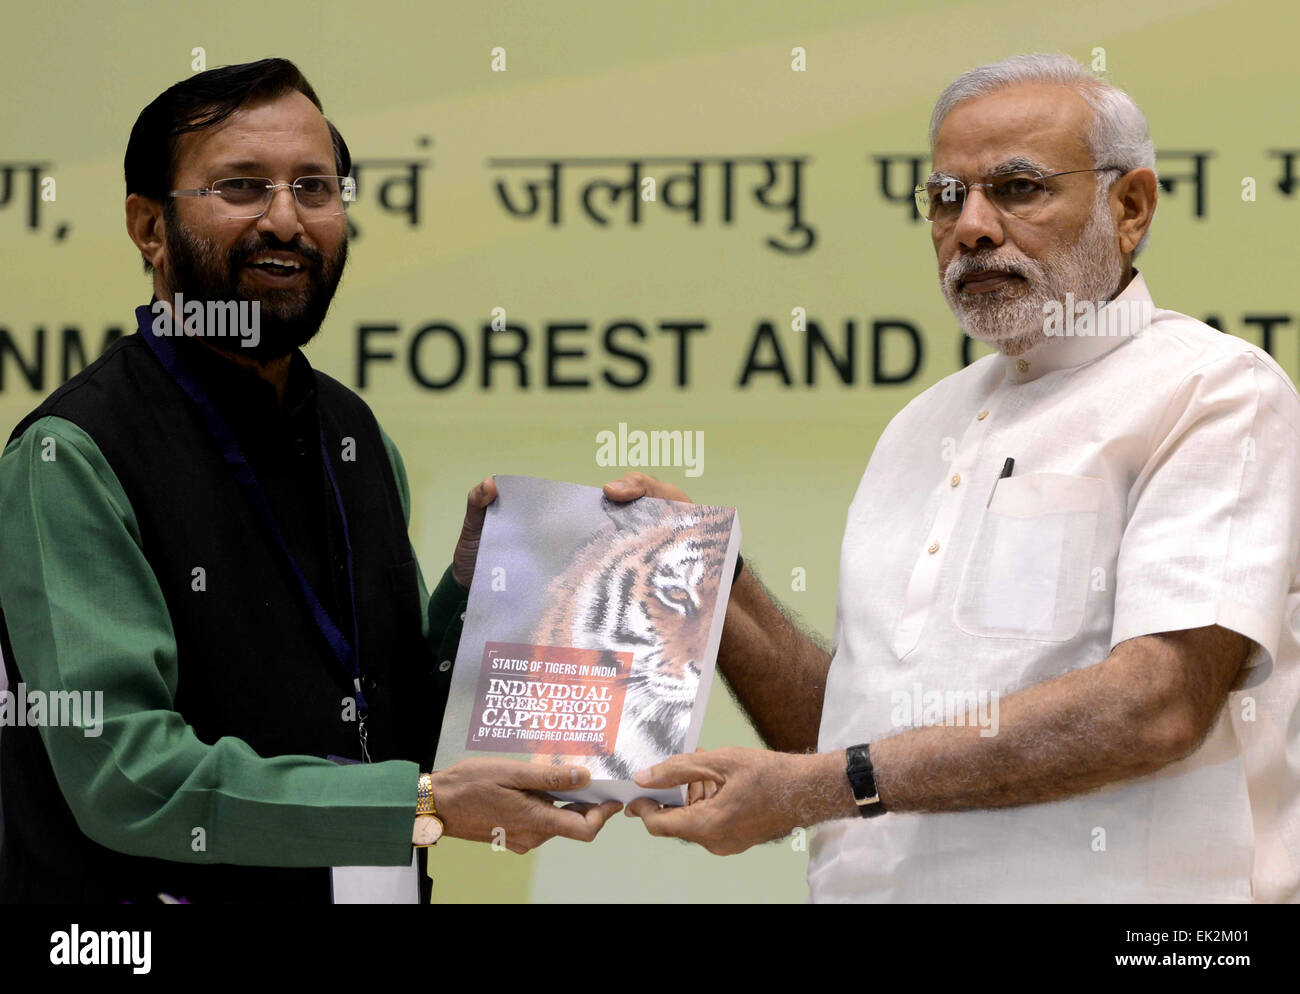 New Delhi, India. 6th Apr, 2015. Indian Environment Minister Prakash Javadekar (L) presents a copy of the latest tiger census report to Indian Prime Minister Narendra Modi during a conference organised by the Indian Environment Ministry in New Delhi, India, April 6, 2015. Indian Prime Minister Narendra Modi on Monday launched the National Air Quality Index so as to monitor pollution levels in 10 major cities. Credit:  Partha Sarkar/Xinhua/Alamy Live News Stock Photo